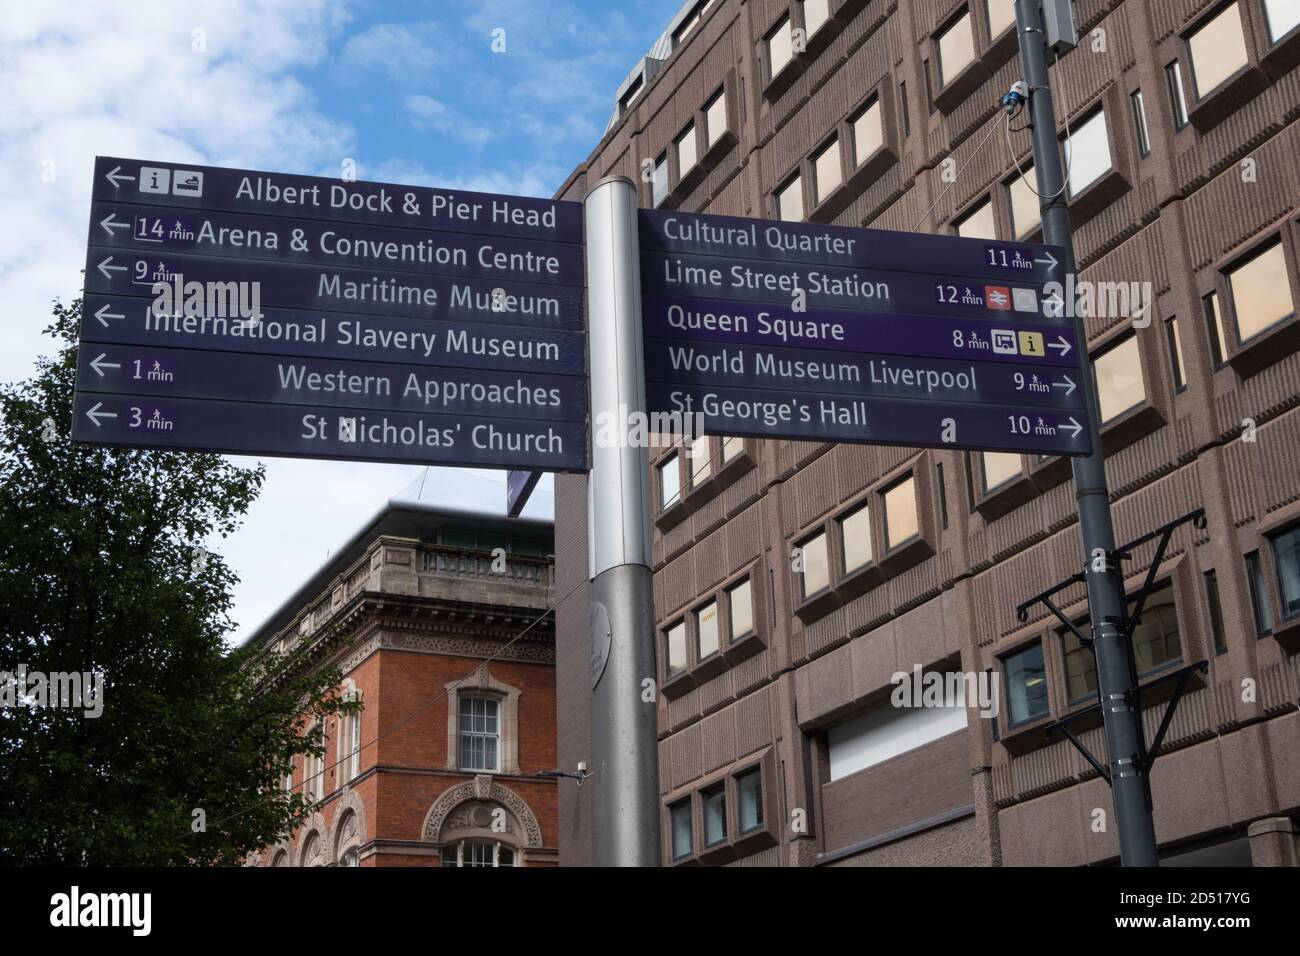 Tourist direction signs in Liverpool July 2020 Stock Photo